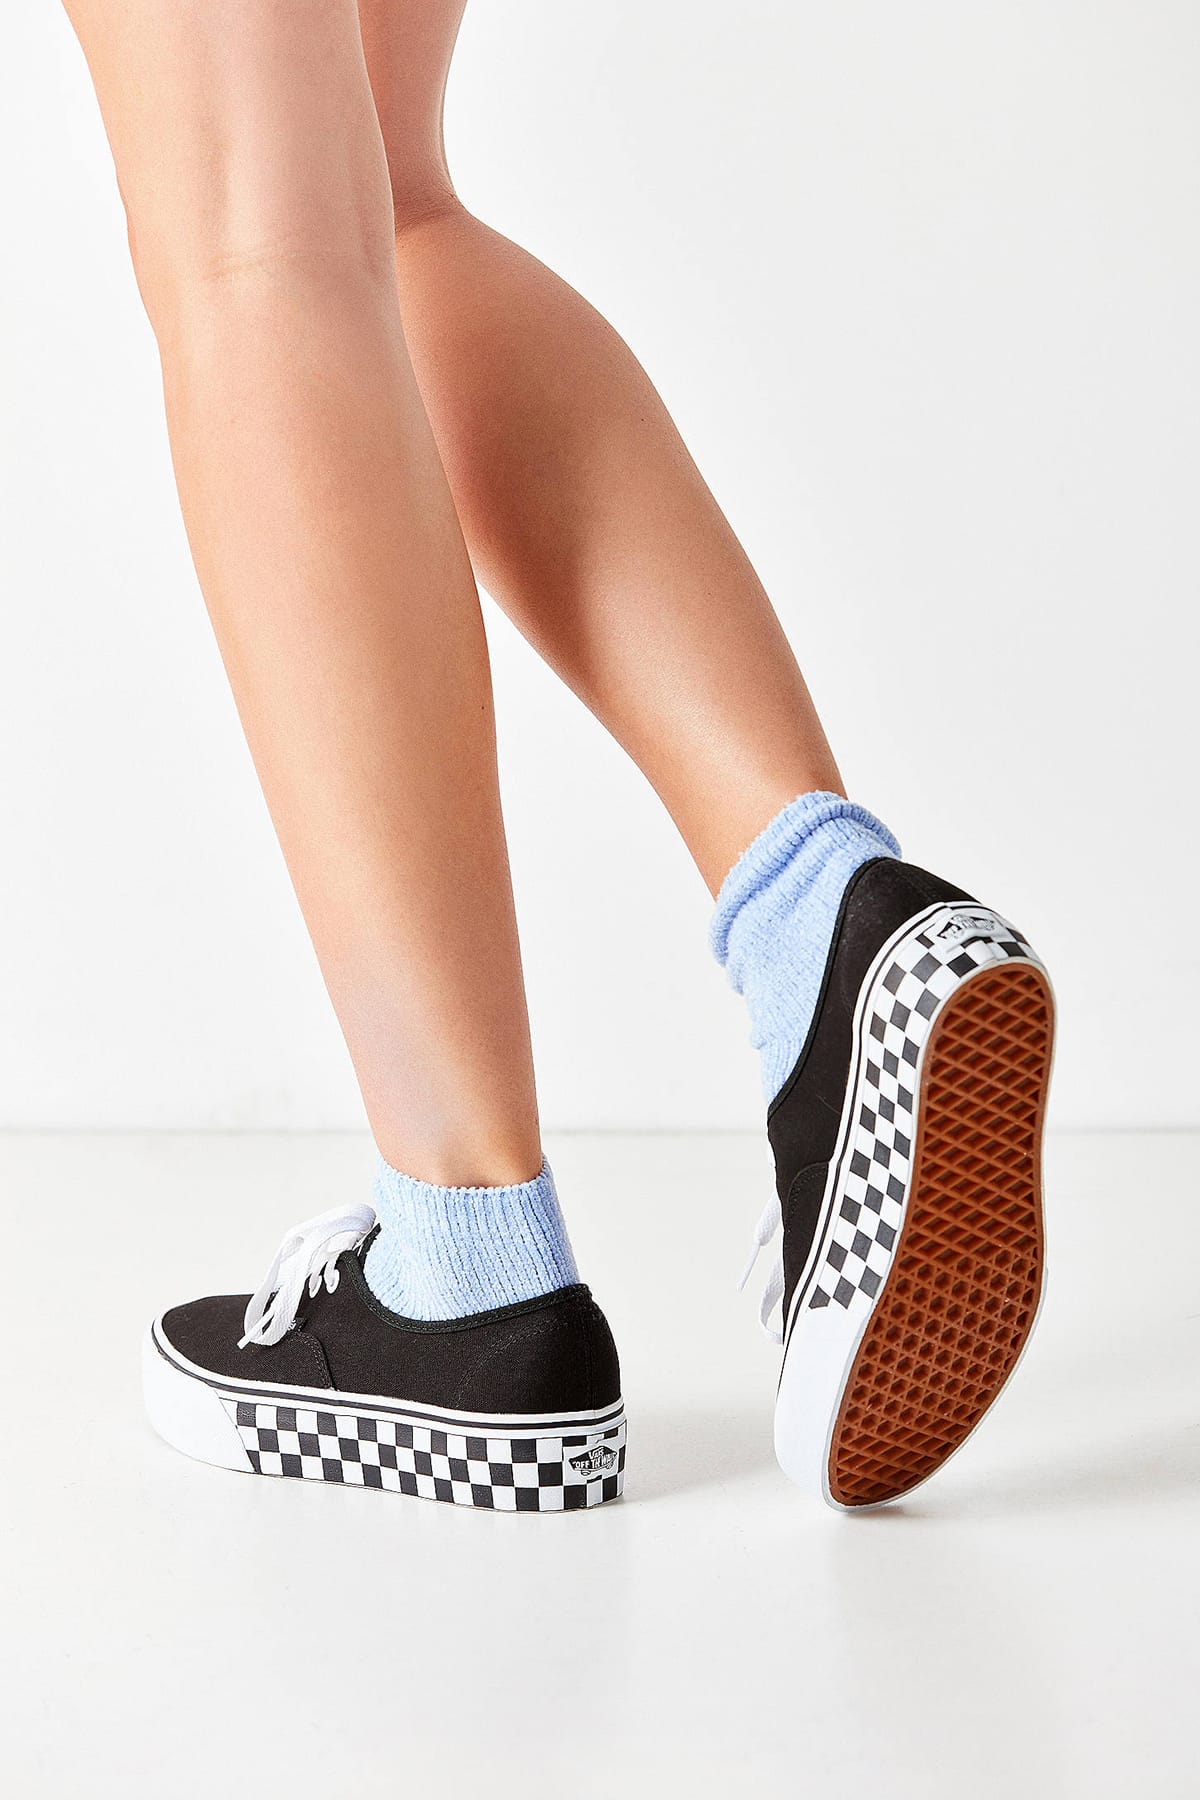 Vans x Urban Outfitters Authentic 